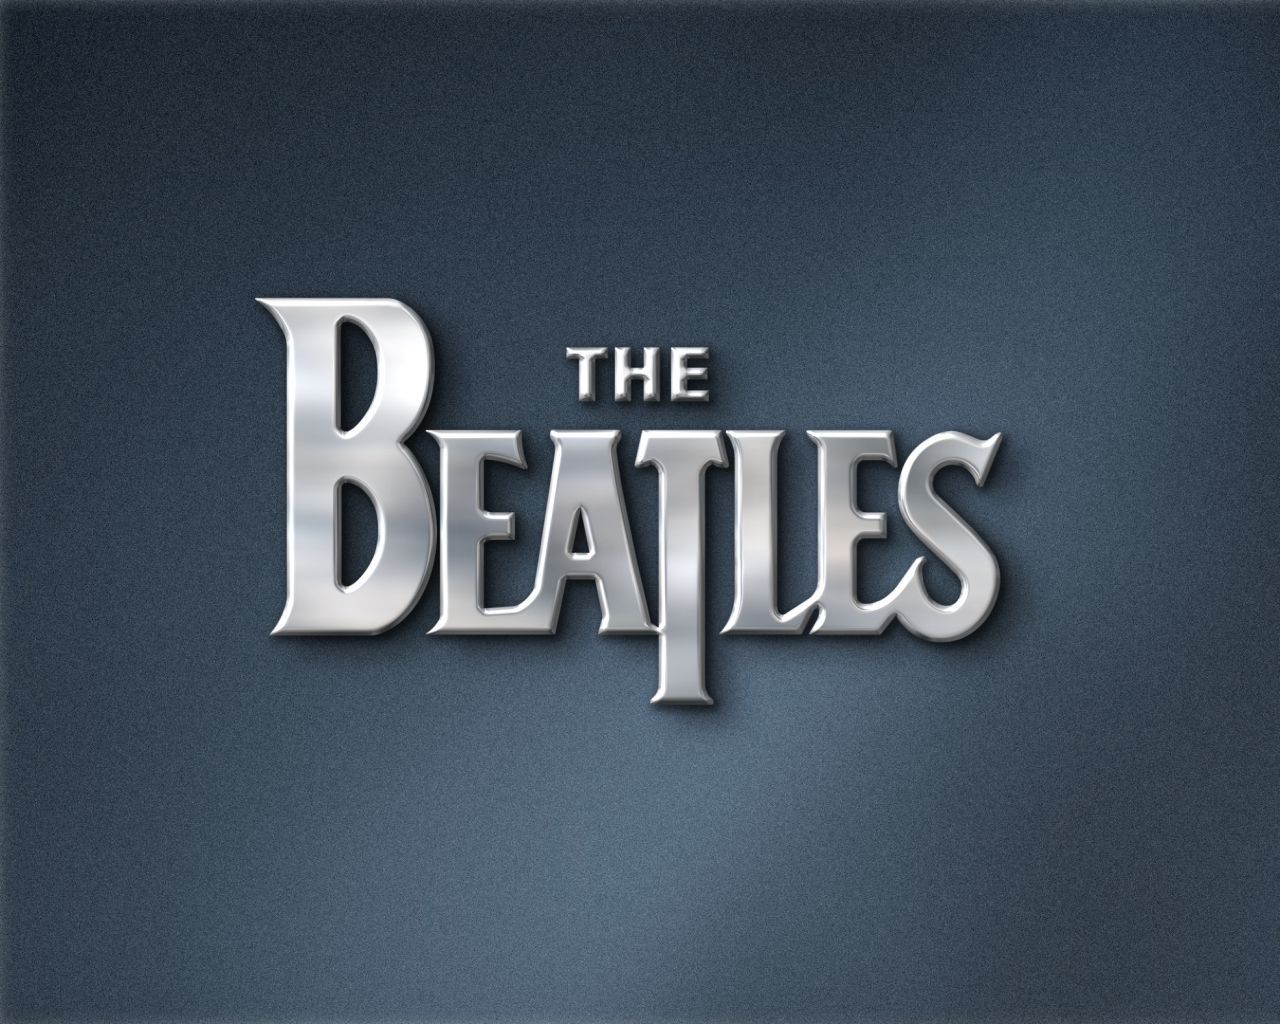 134 The Beatles HD Wallpapers | Backgrounds - Wallpaper Abyss